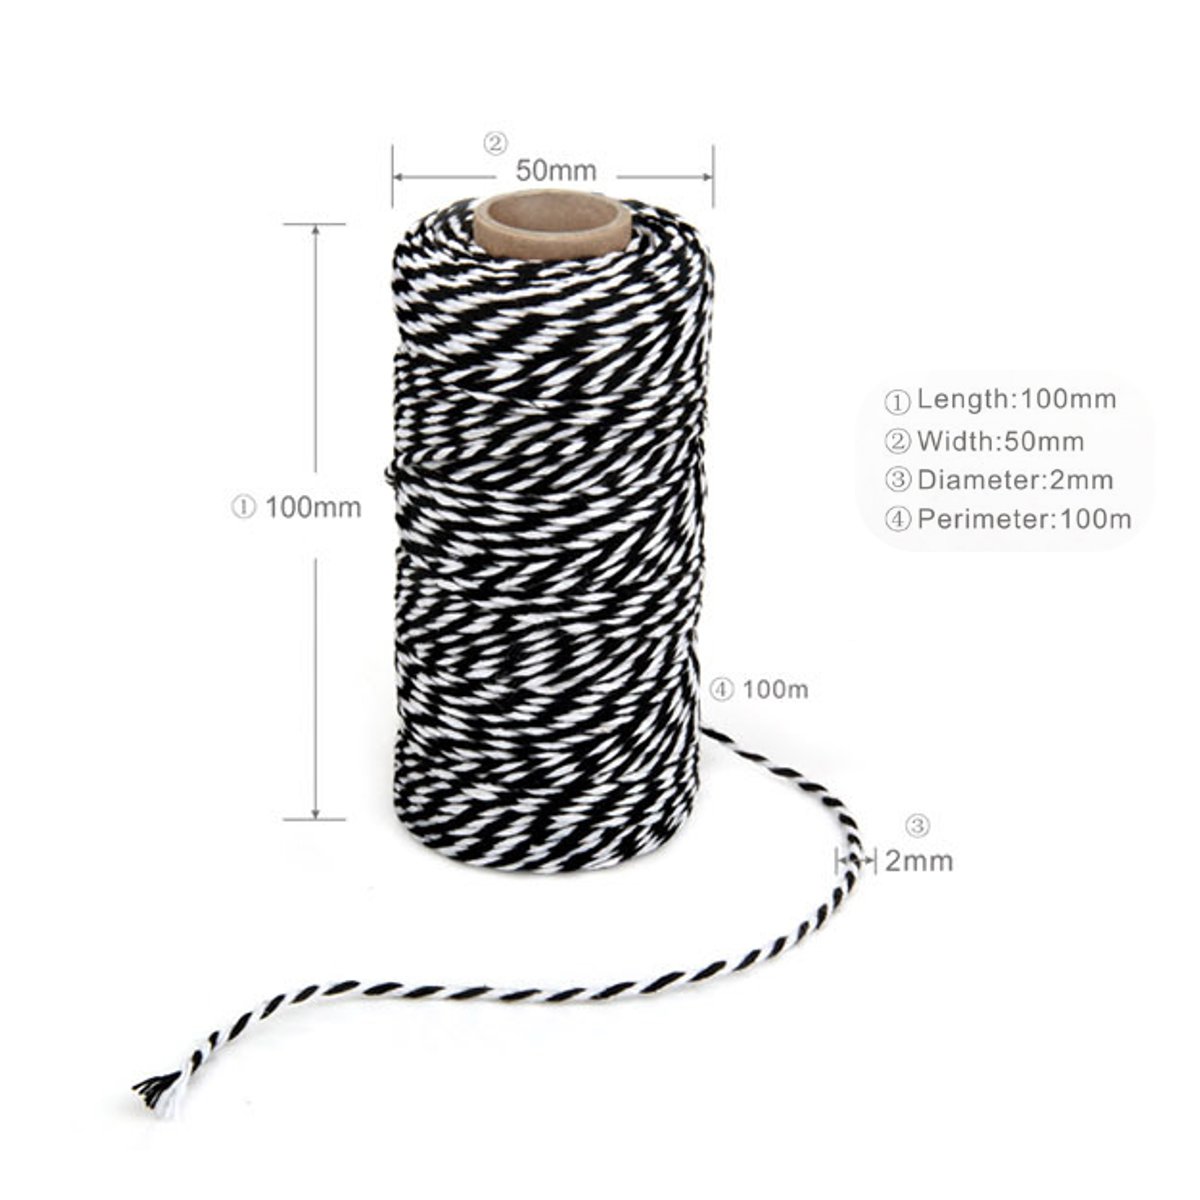 2mm-100M-Macrame-Rope-Bicolor-Cotton-Twisted-Cord-Hand-Craft-String-DIY-Sewing-Cloth-Supply-1537839